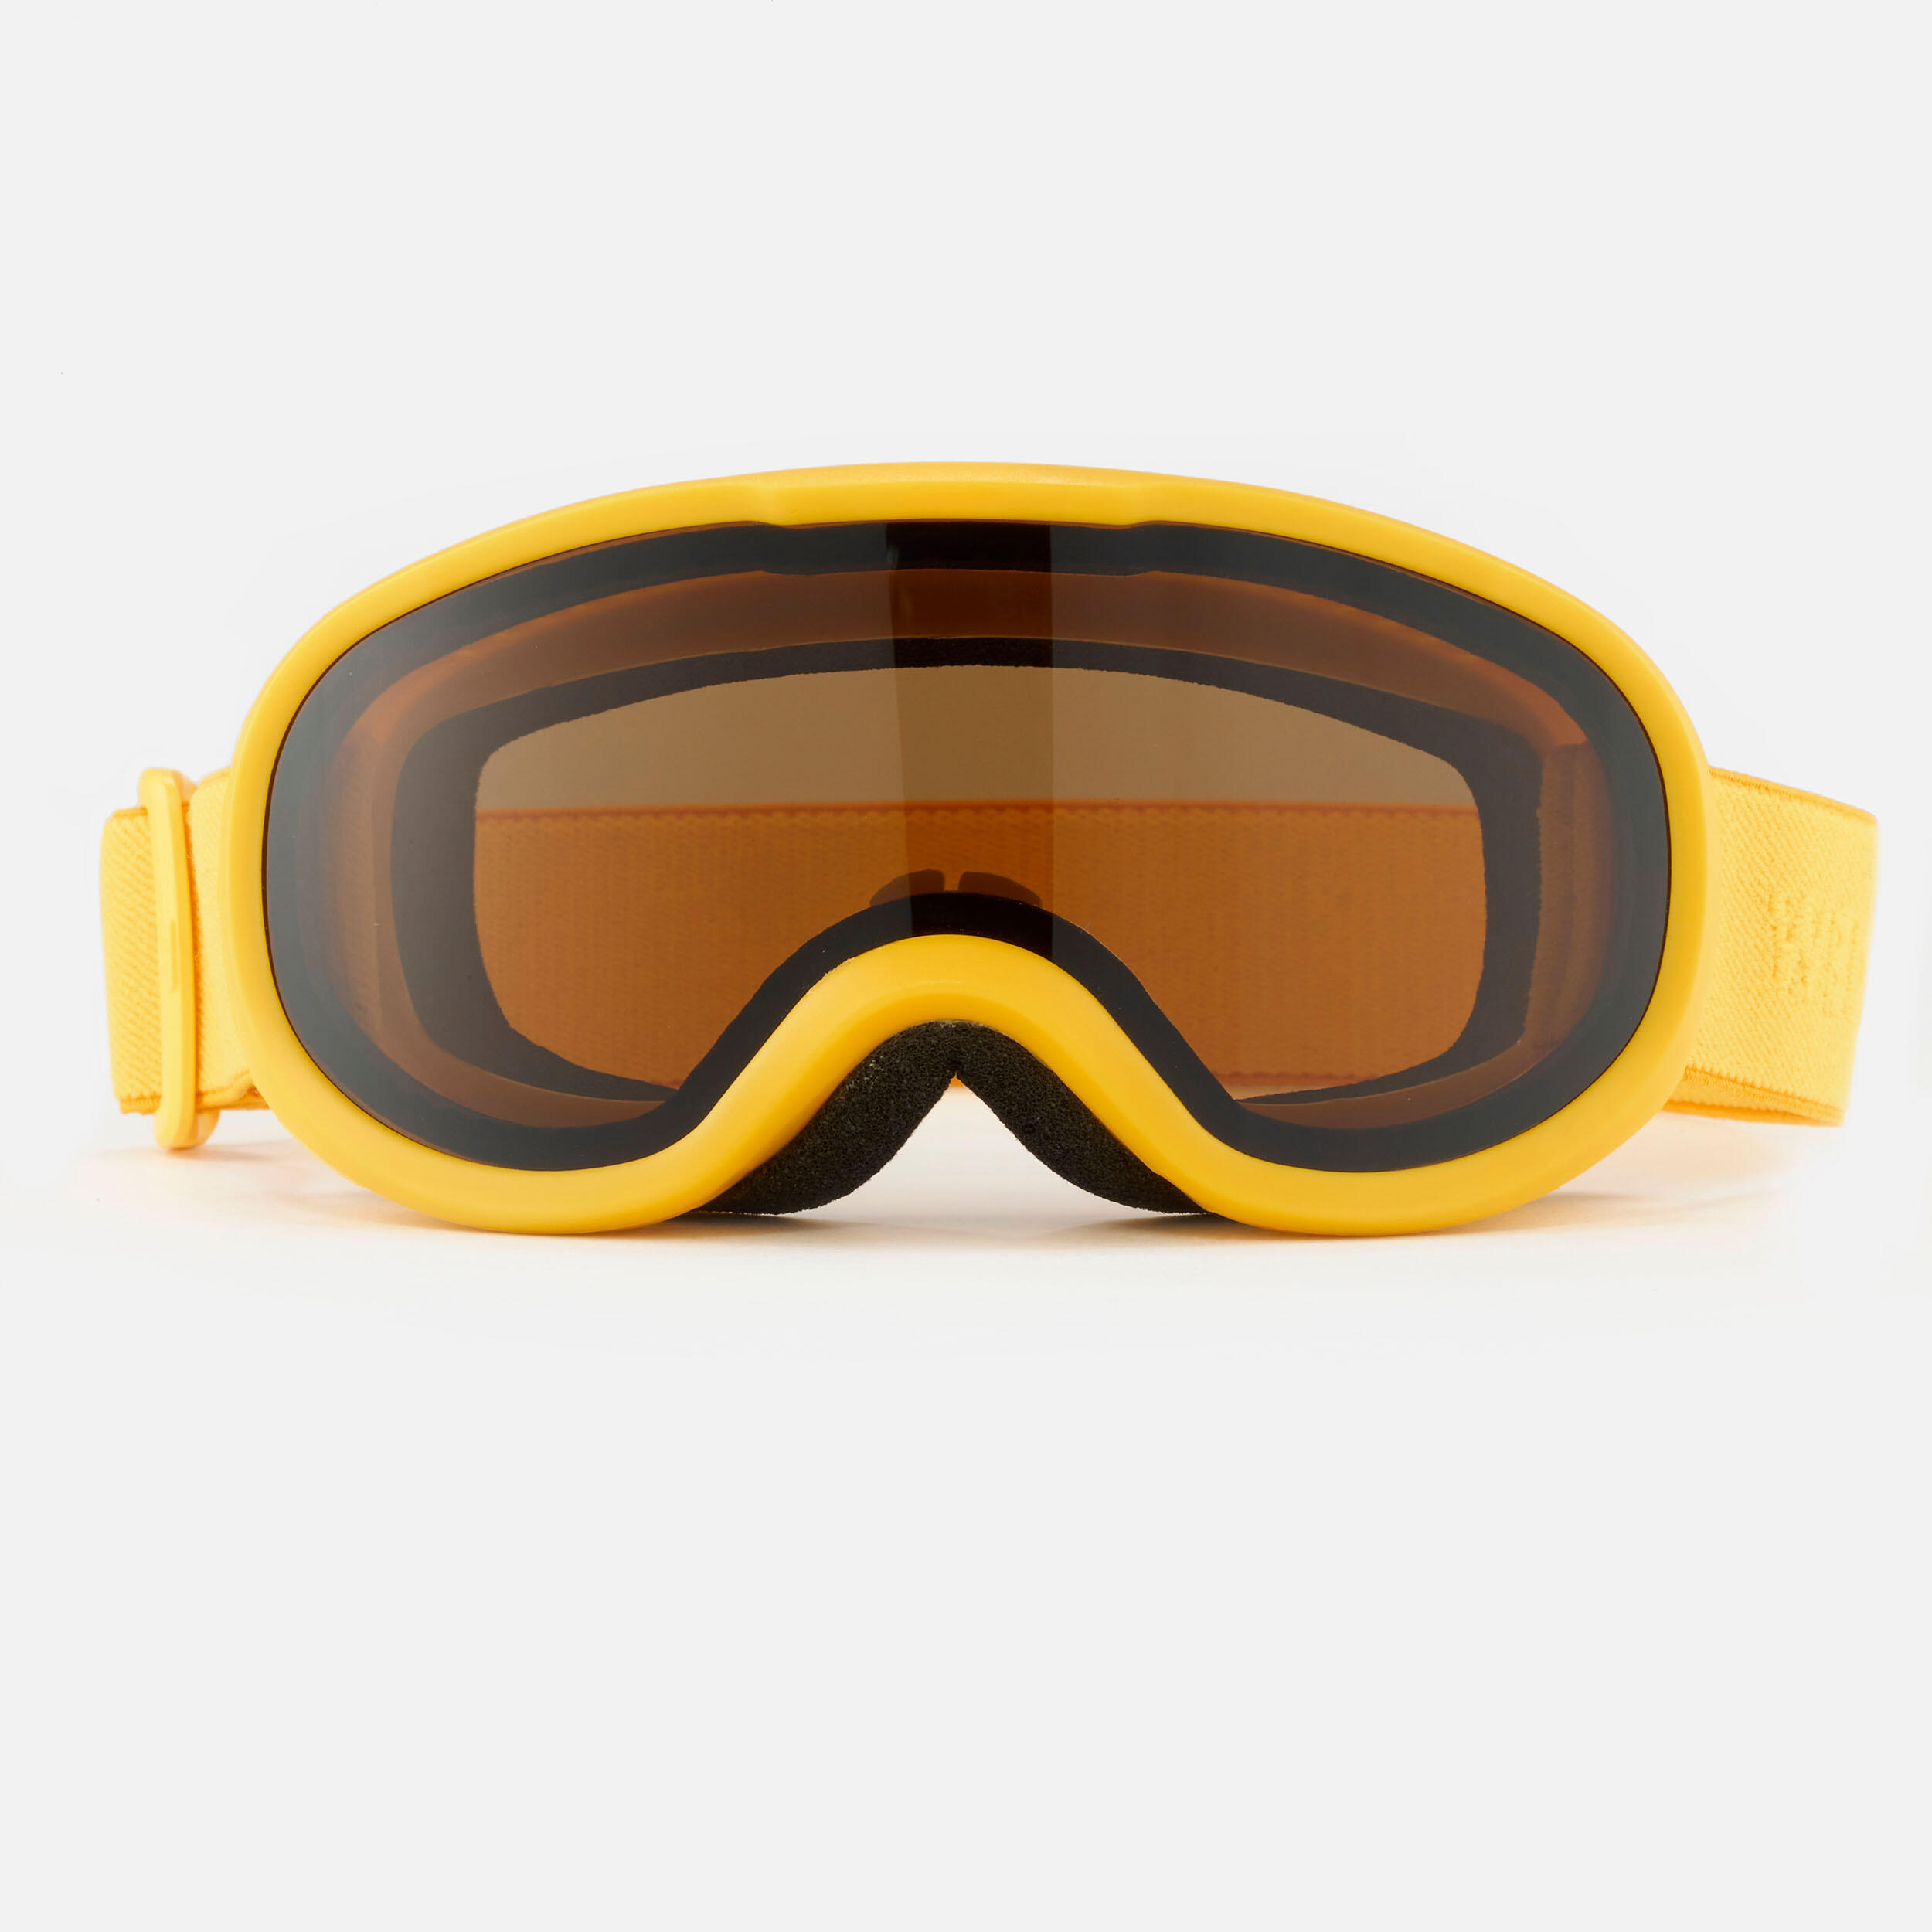 Kids’ ski goggles 12 to 36 months all weather category 3 yellow 4/5